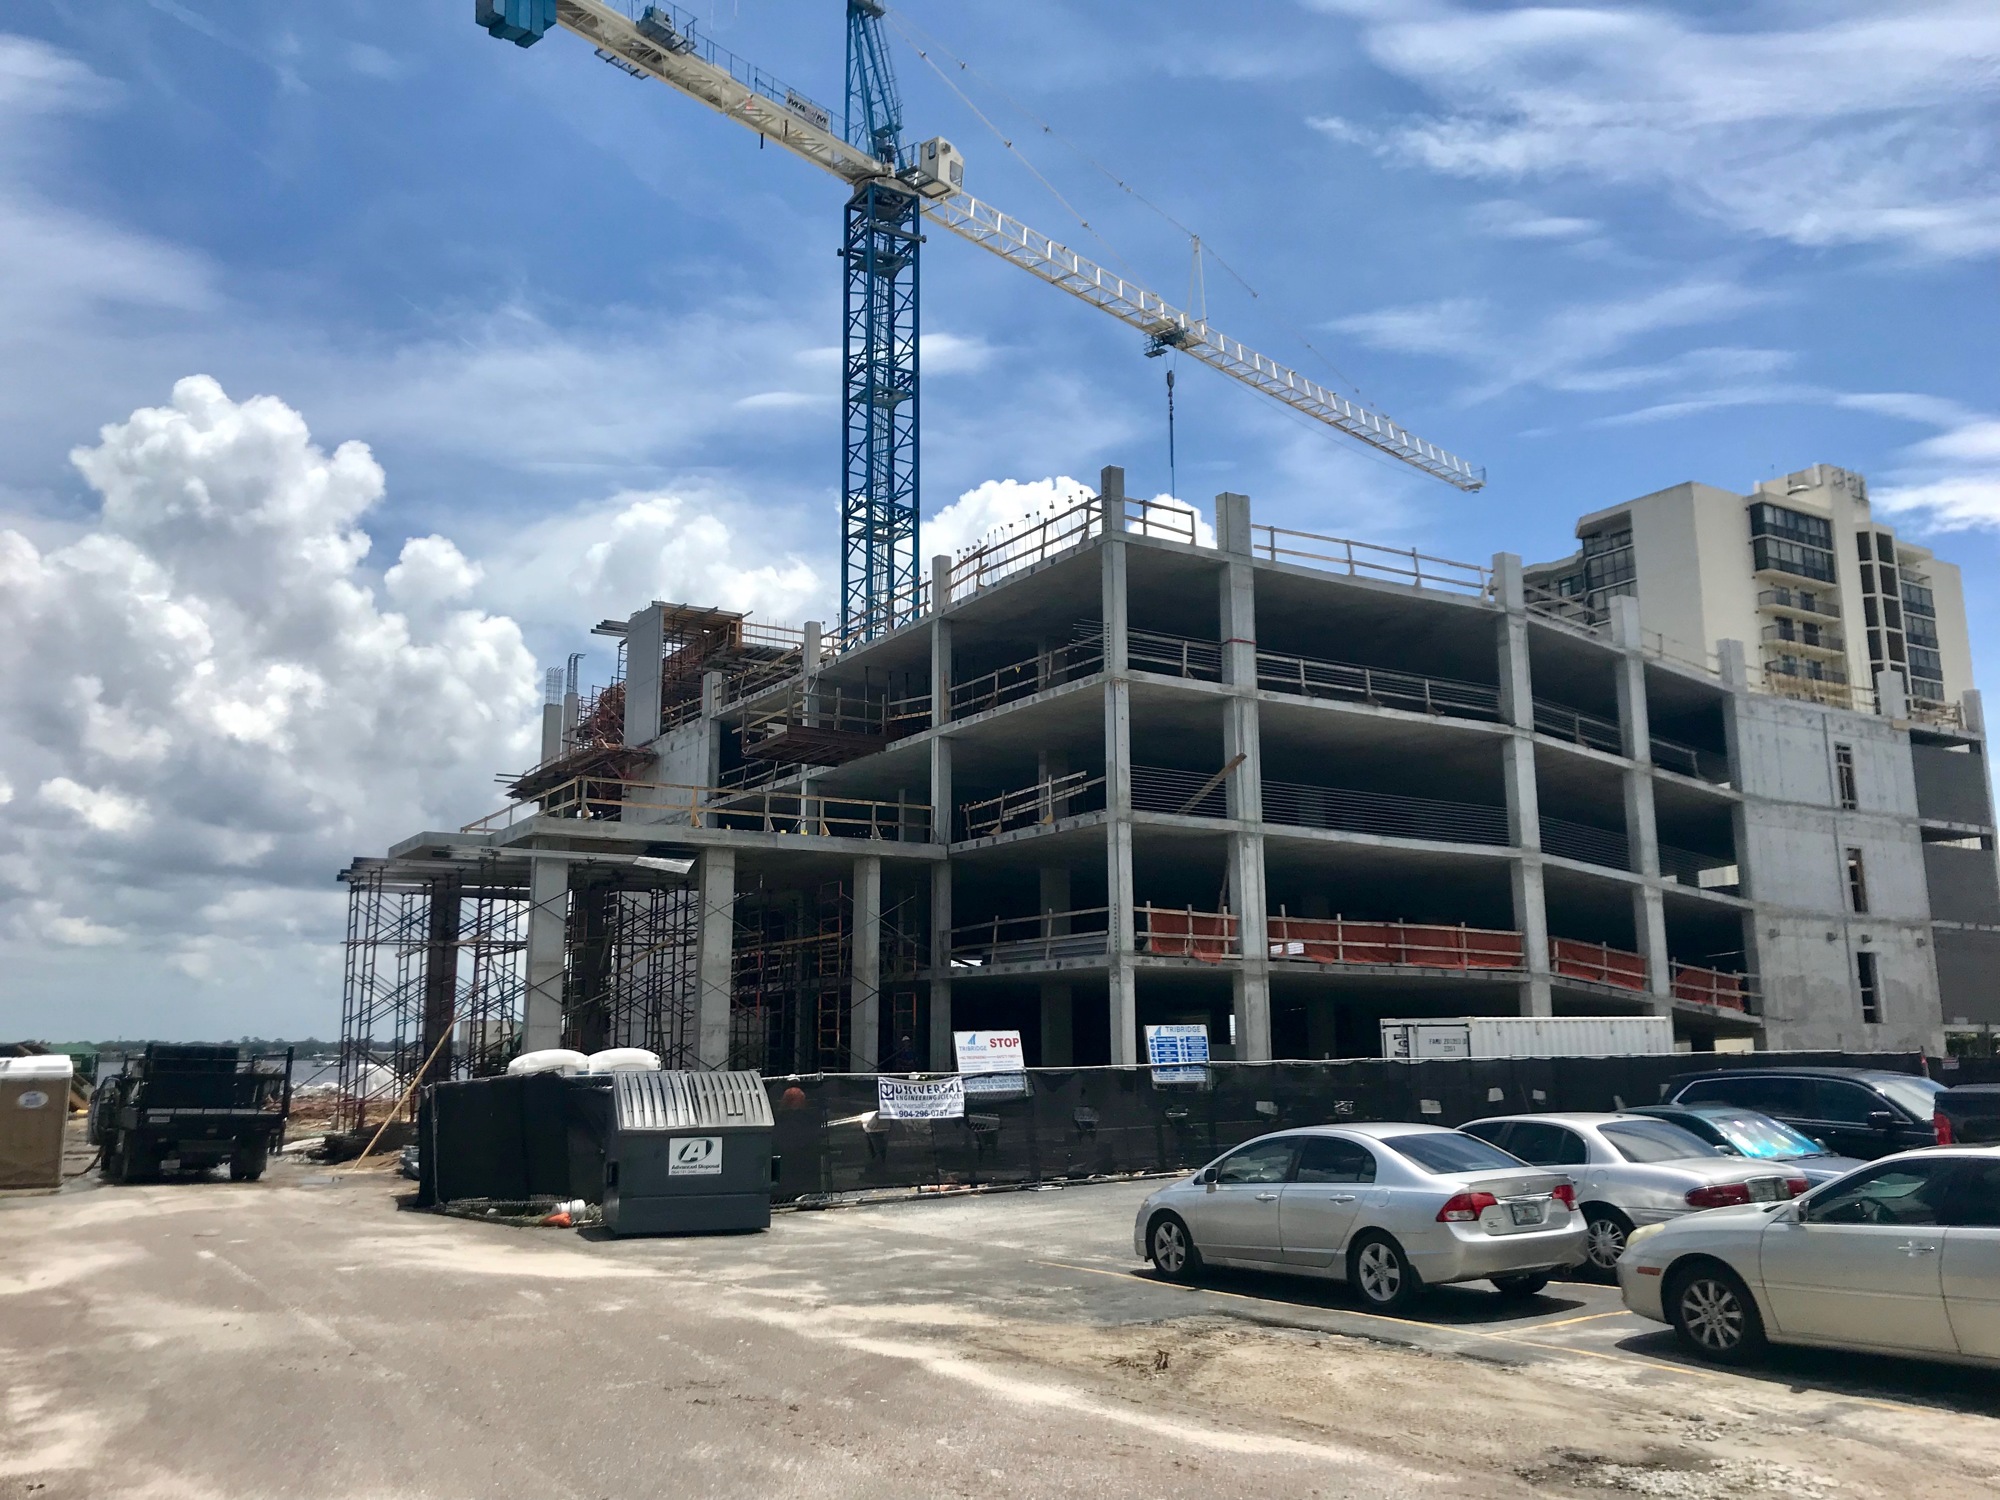 The six-story parking garage for the Bishop Gate apartments is under construction at the site and appears to be close to completion. Photo by Jay Schlichter